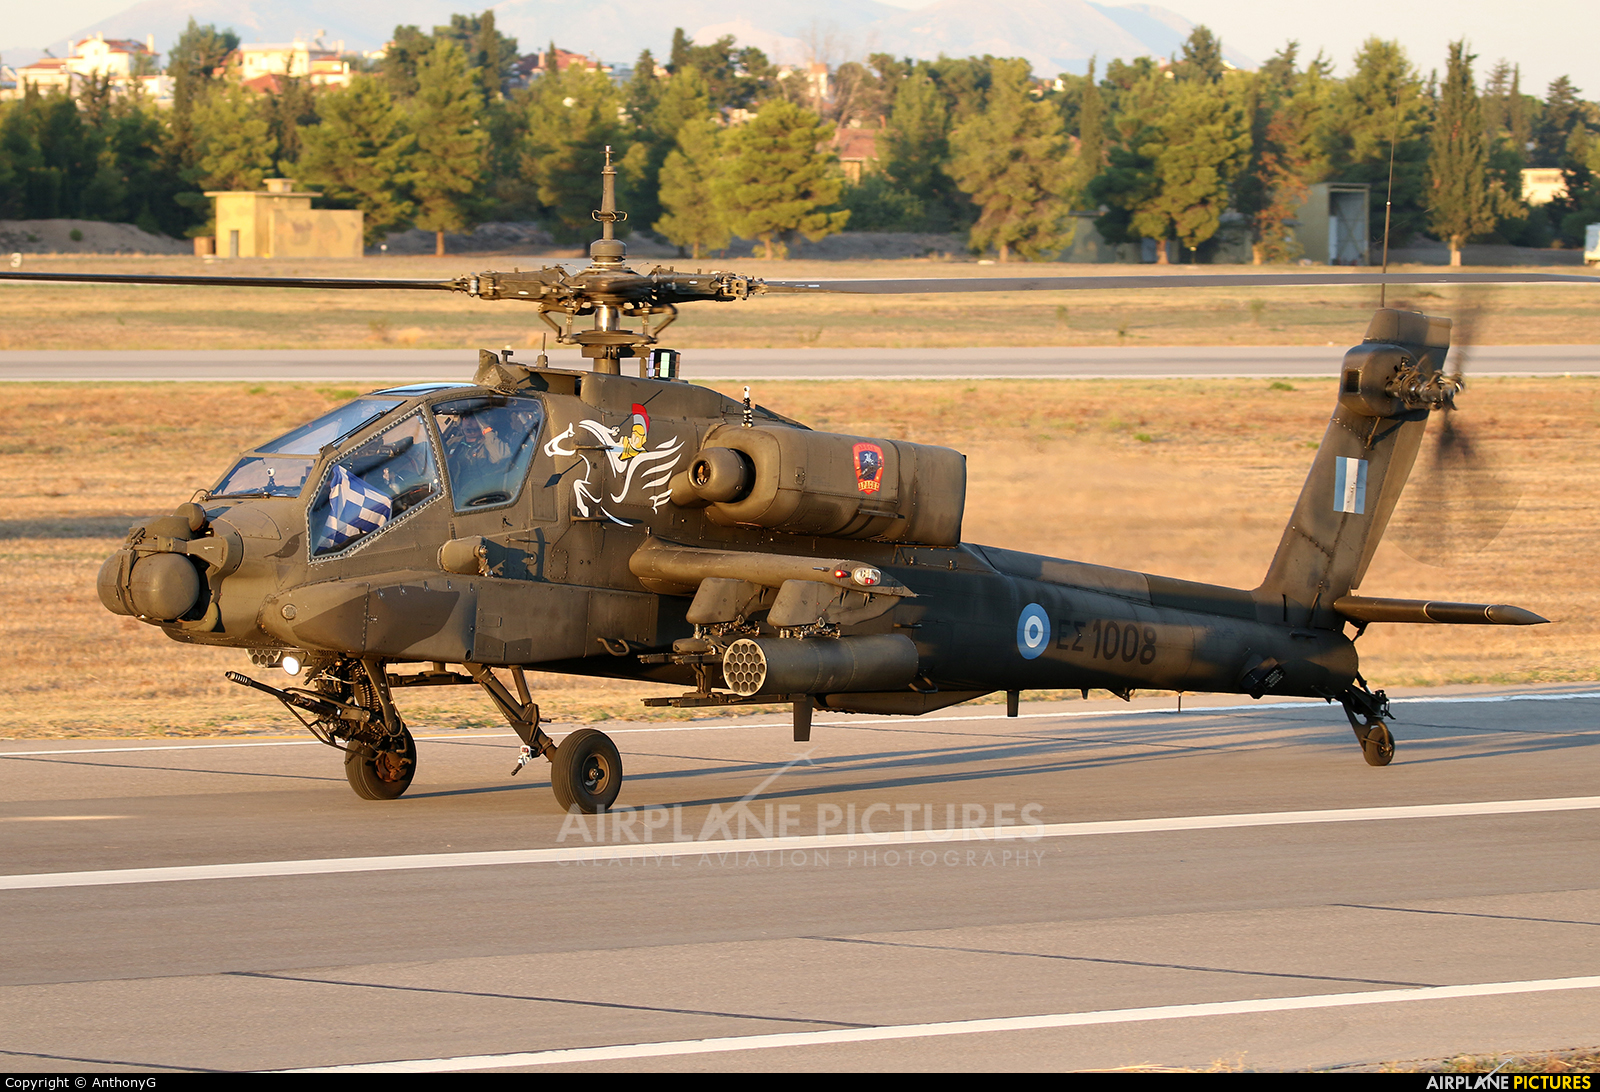 Greece - Hellenic Army ES1008 aircraft at Tanagra